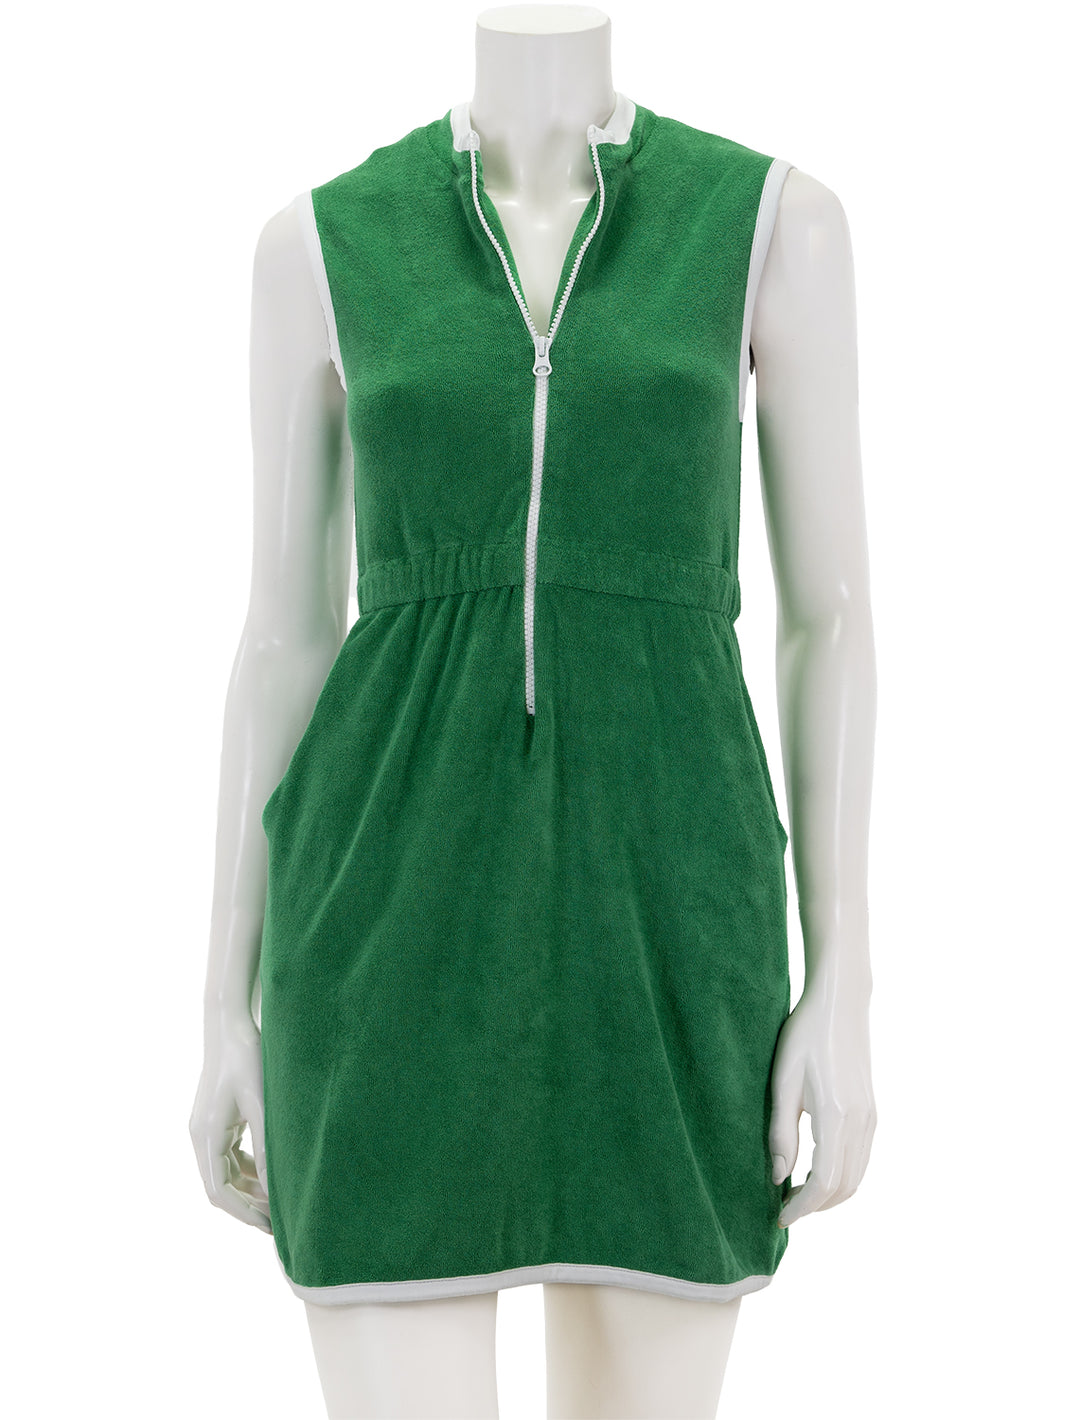 Front view of KULE's the terry dress in green.